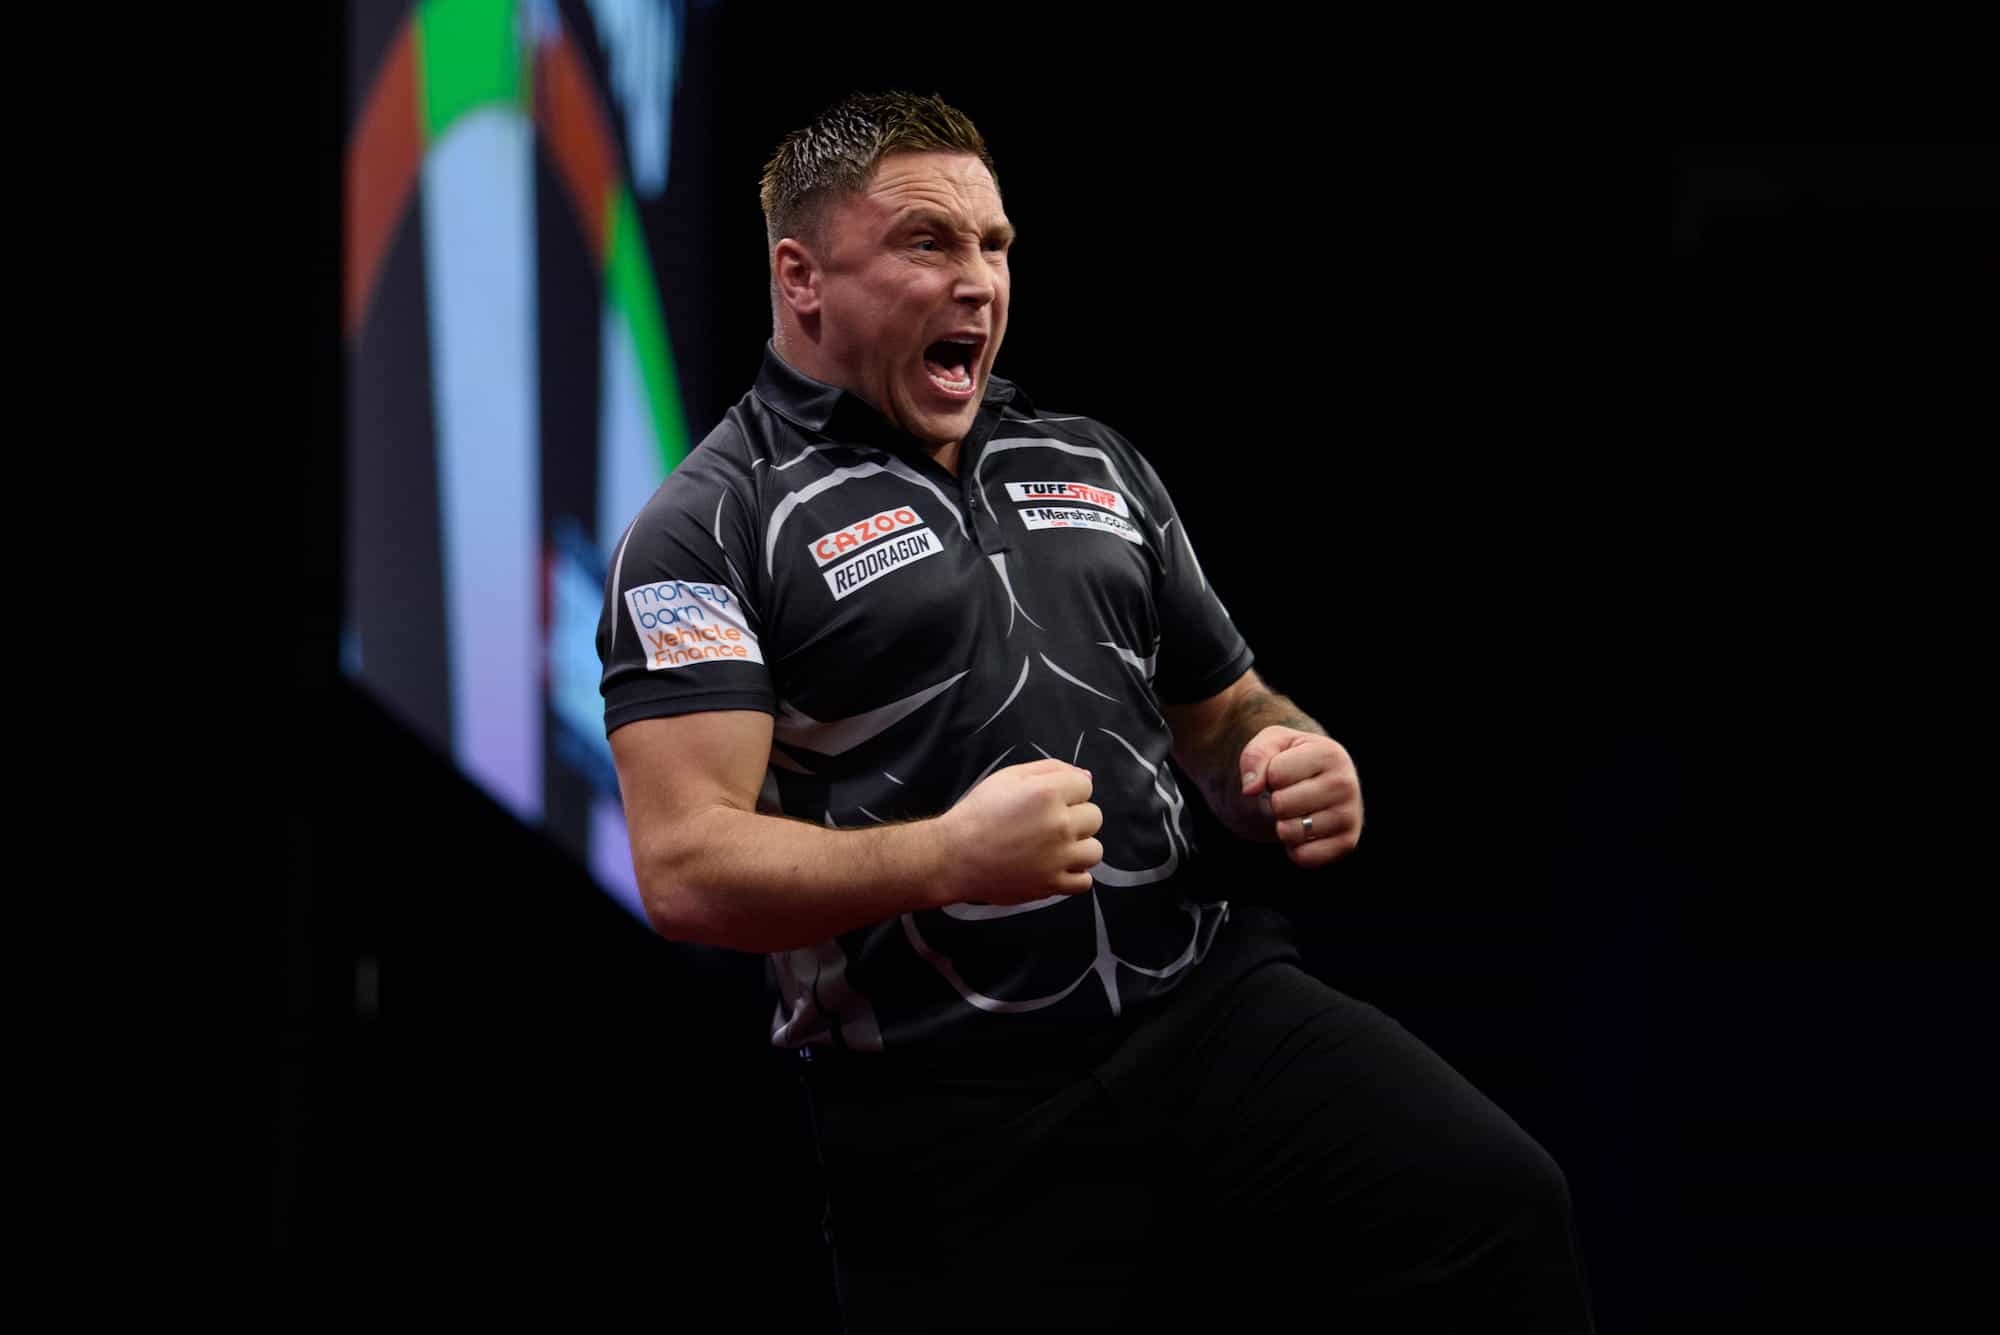 Gerwyn Price celebrates a big check-out at the oche.